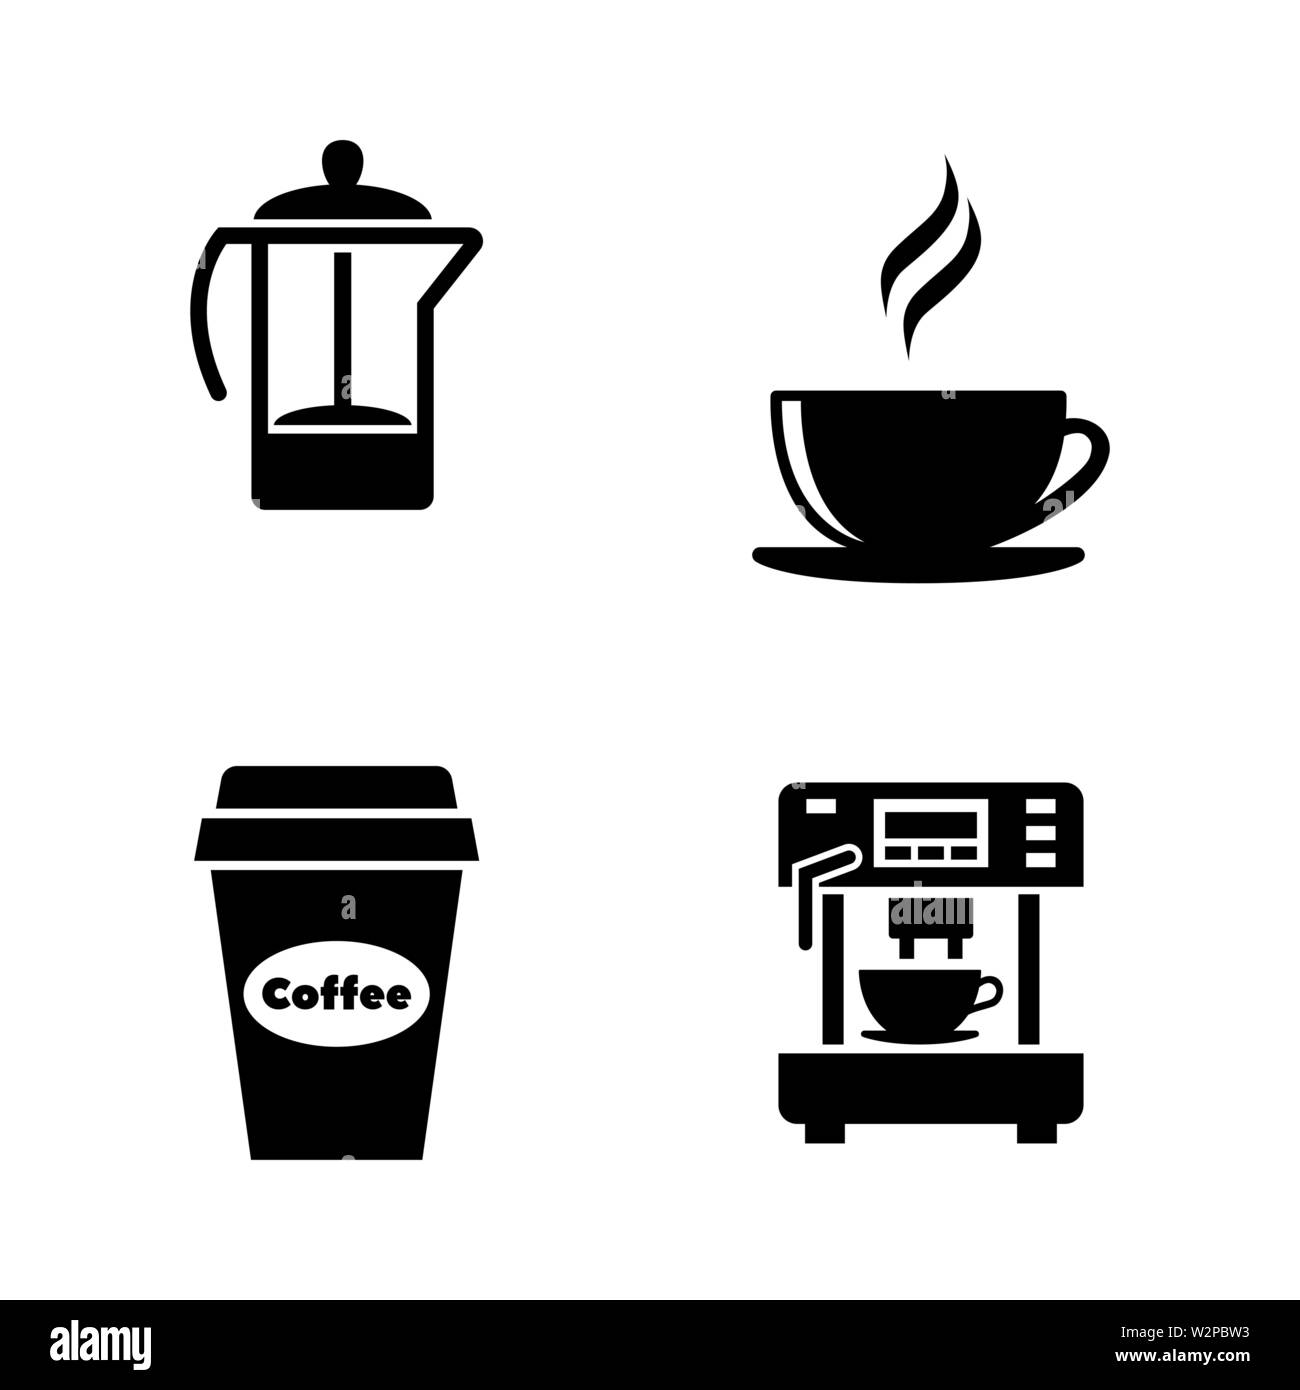 Coffee and Tea. Simple Related Vector Icons Set for Video, Mobile Apps, Web Sites, Print Projects and Your Design. Black Flat Illustration on White Ba Stock Vector